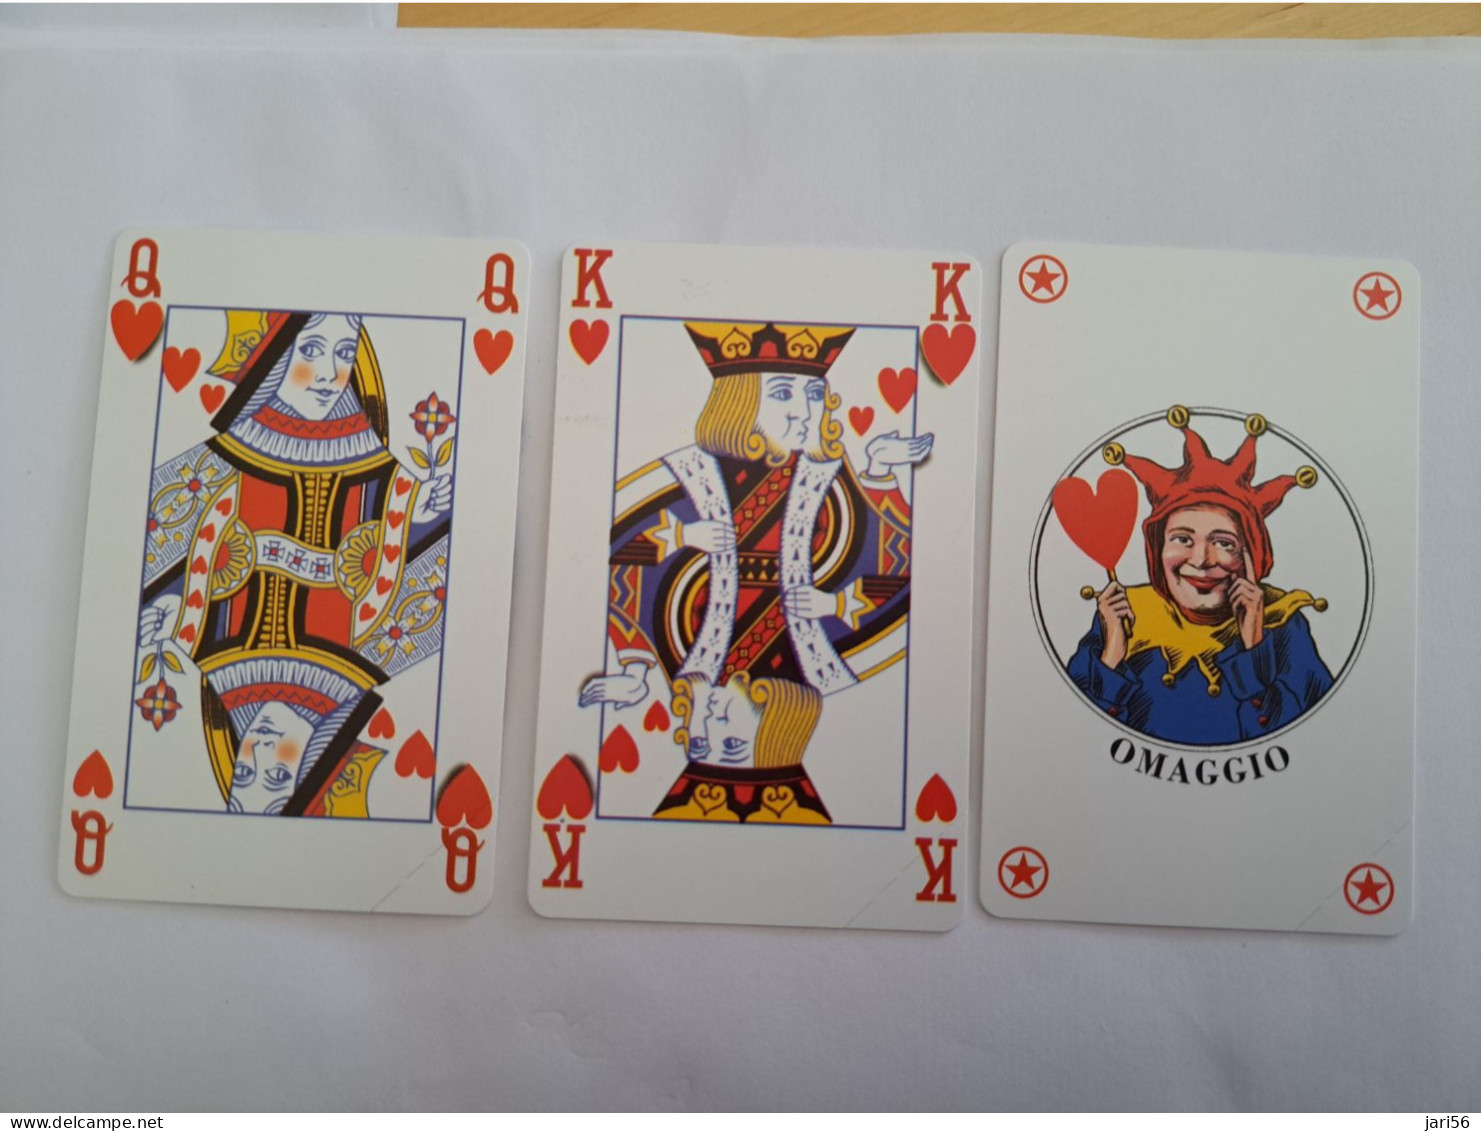 ITALIA LIRE 2000/ 10.000 X 2  /  PLAYING CARDS ON CARD/ KING/QUEEN/ JOKER / 3 CARDS    MINT  ** 13831 ** - Public Ordinary